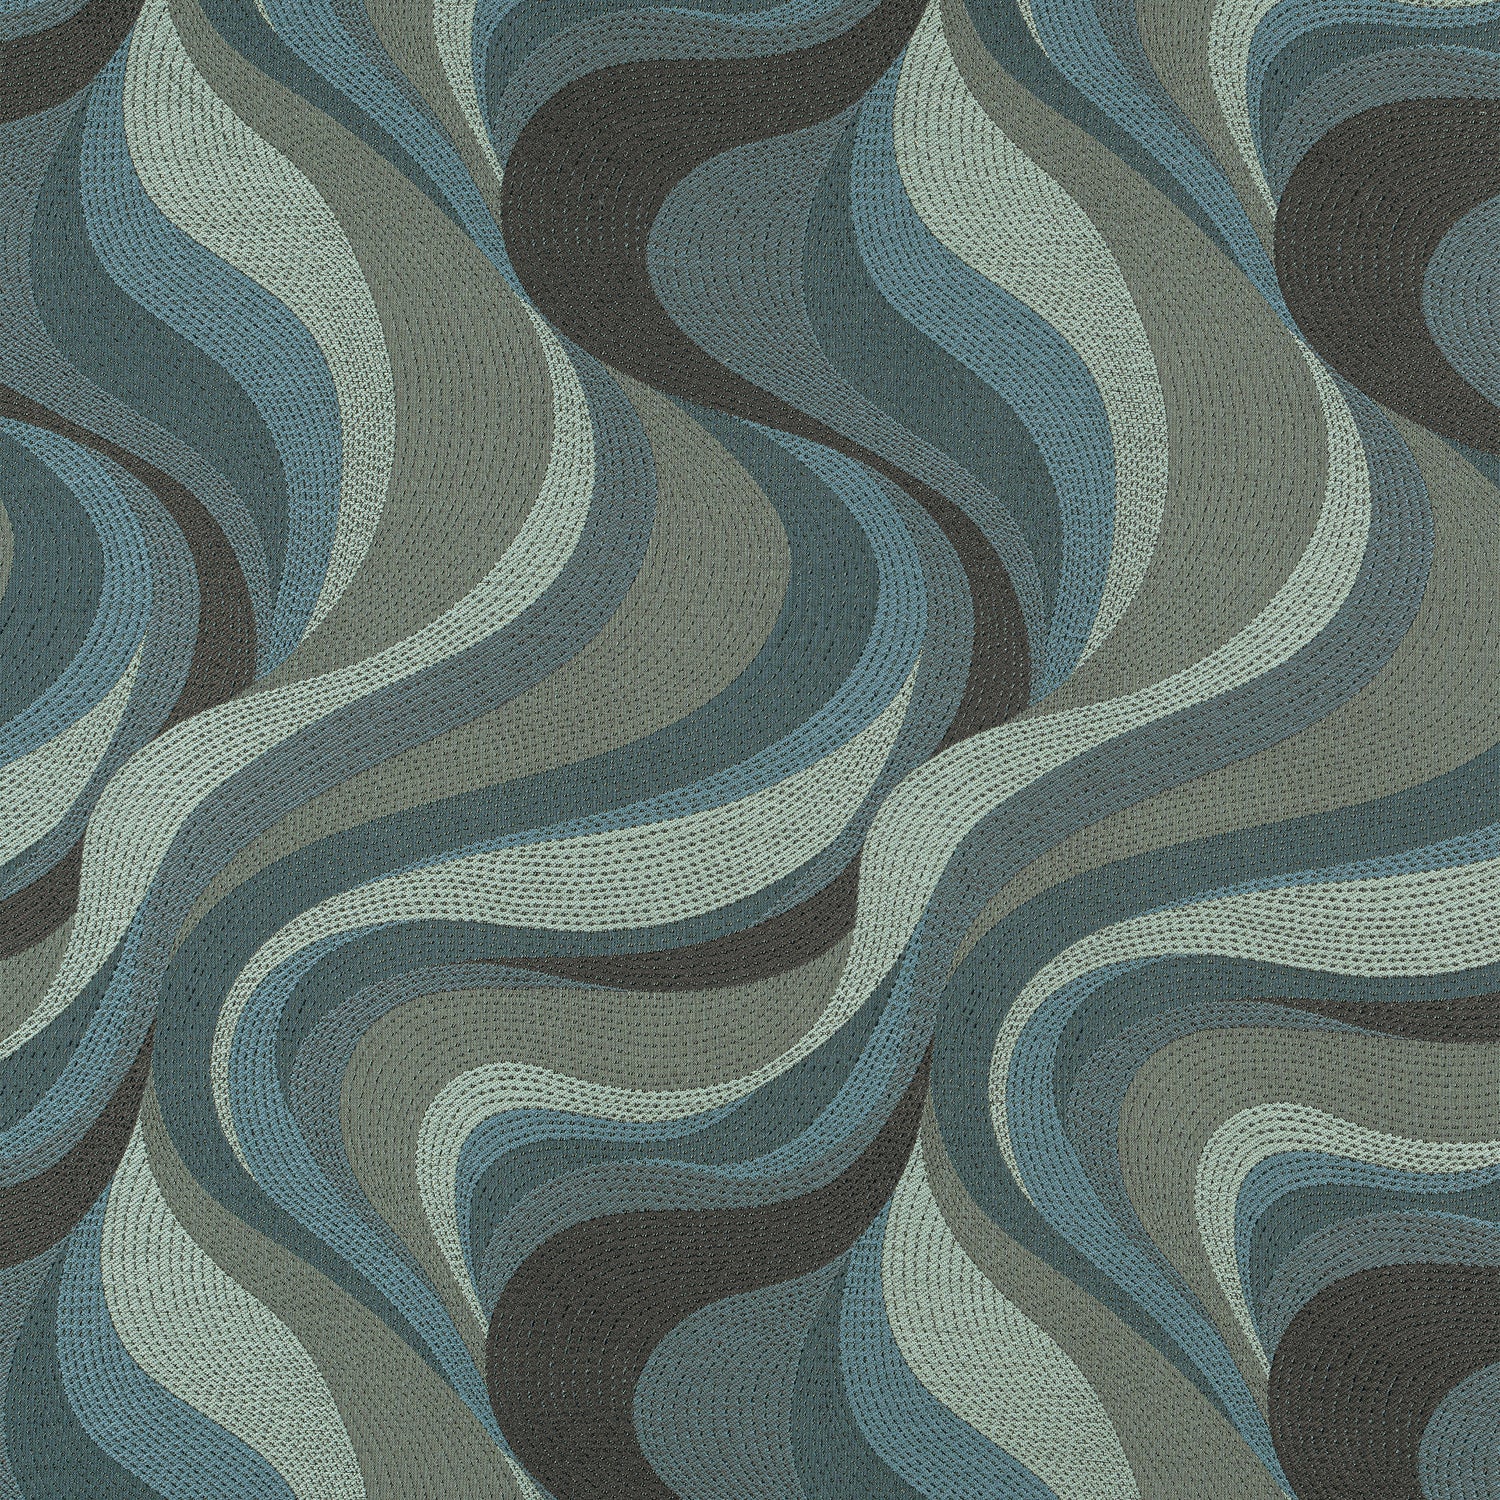 Passage fabric in lake color - pattern number W74201 - by Thibaut in the Passage collection